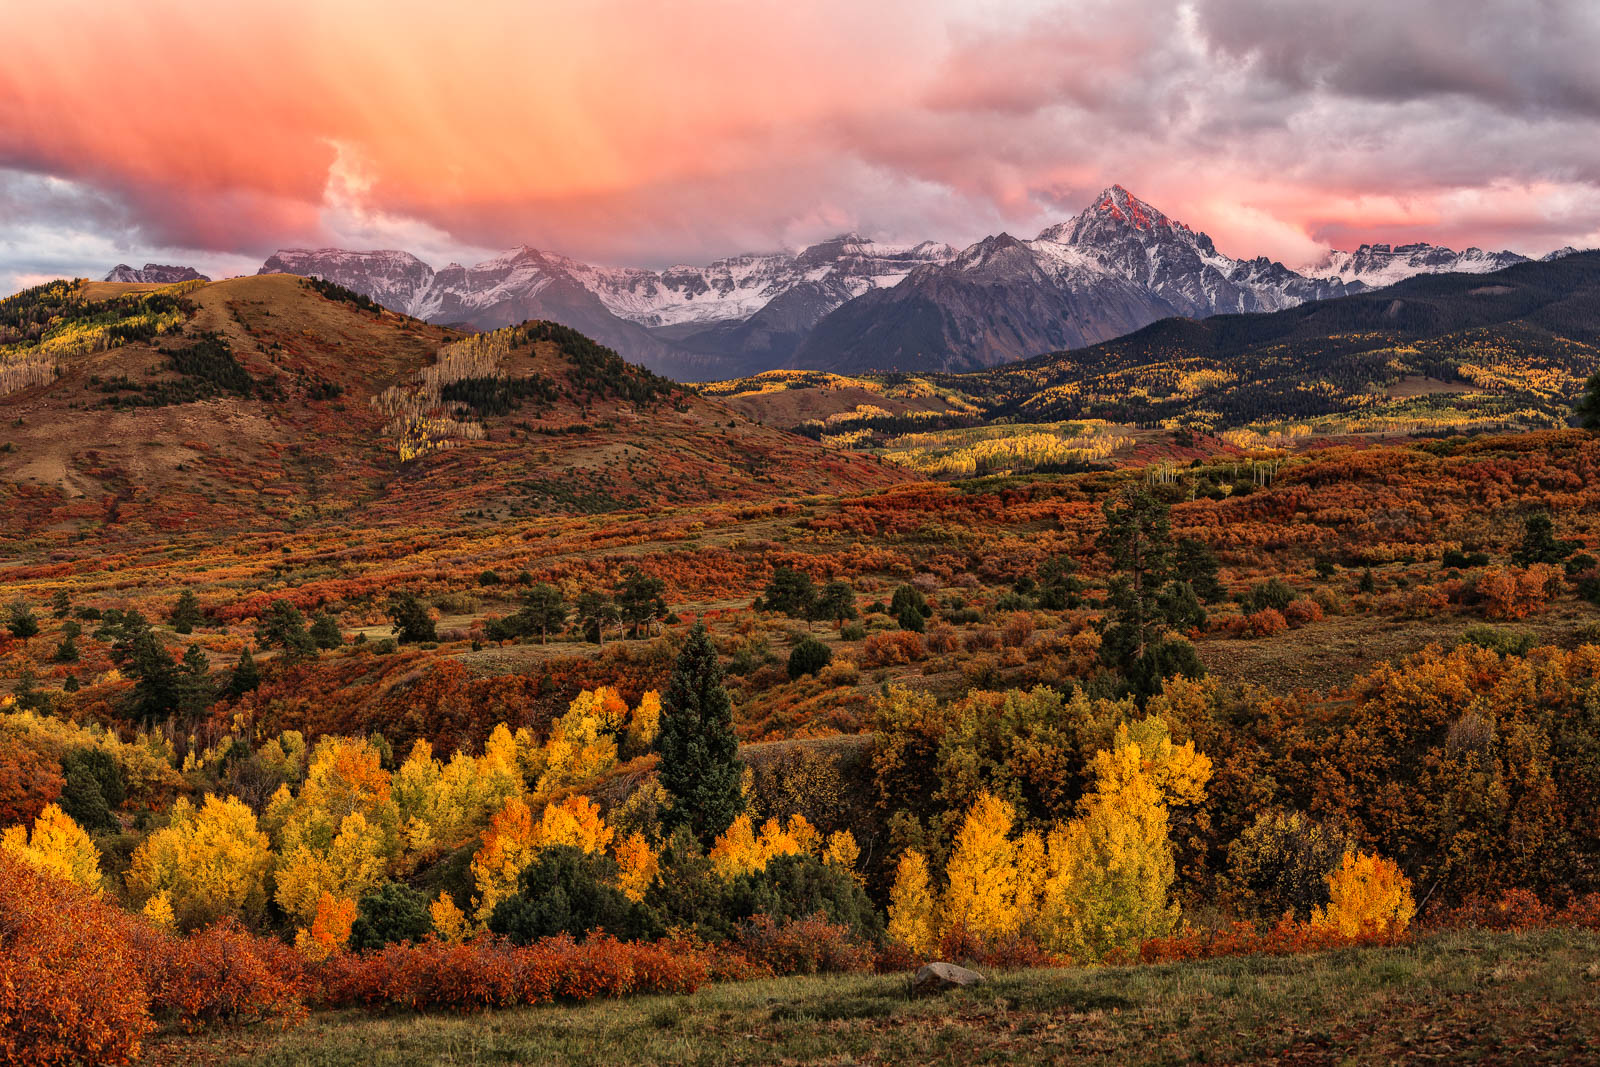 A spectacular sunset erupts over Dallas Divide in the San Juan Mountains of Colorado